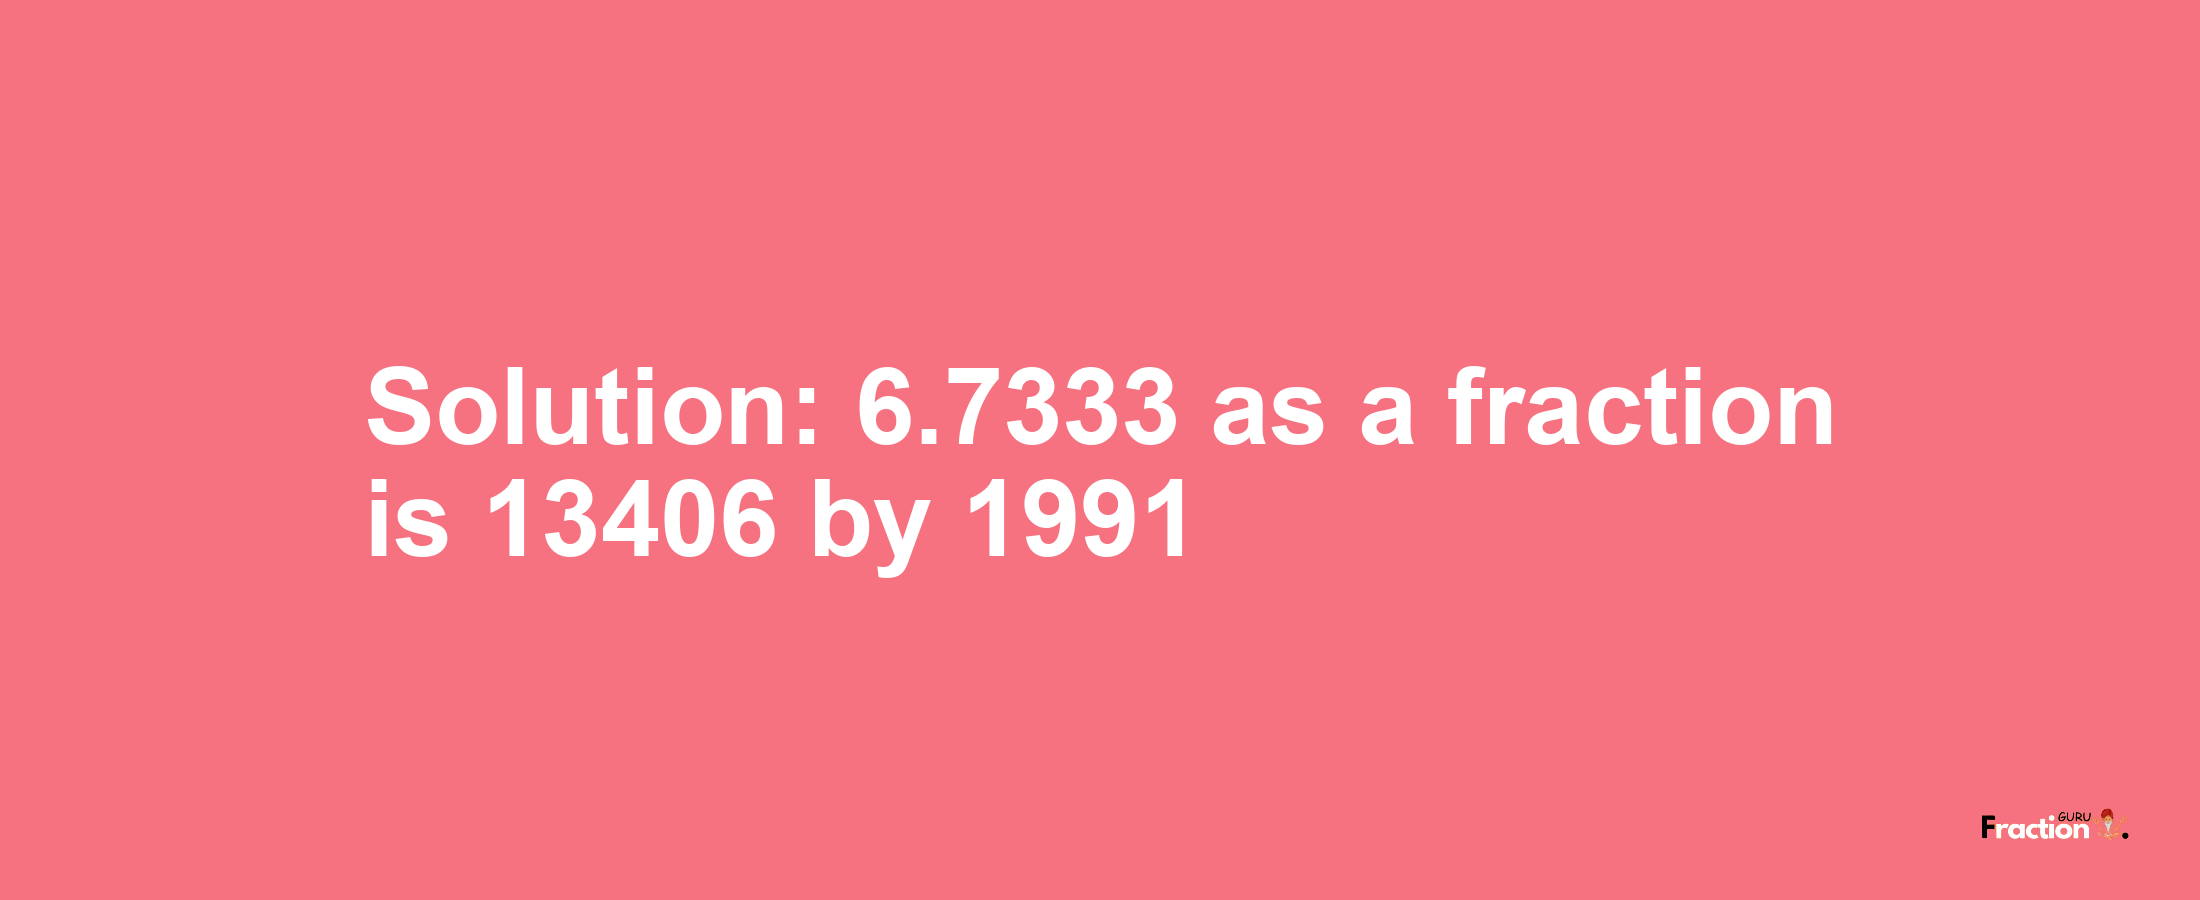 Solution:6.7333 as a fraction is 13406/1991